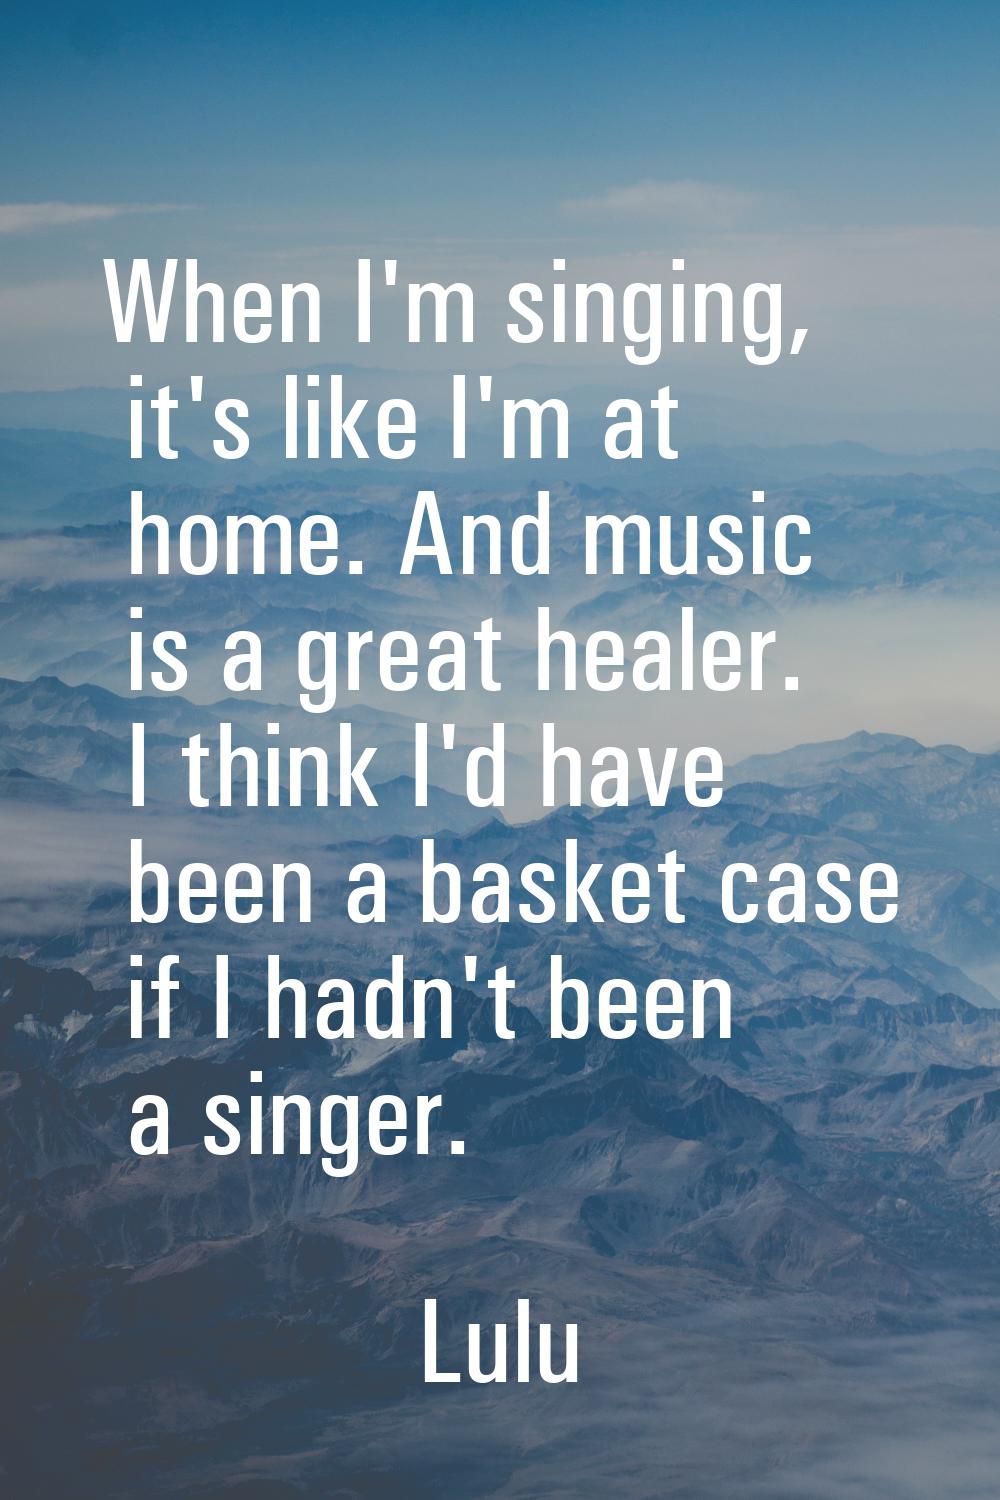 When I'm singing, it's like I'm at home. And music is a great healer. I think I'd have been a baske